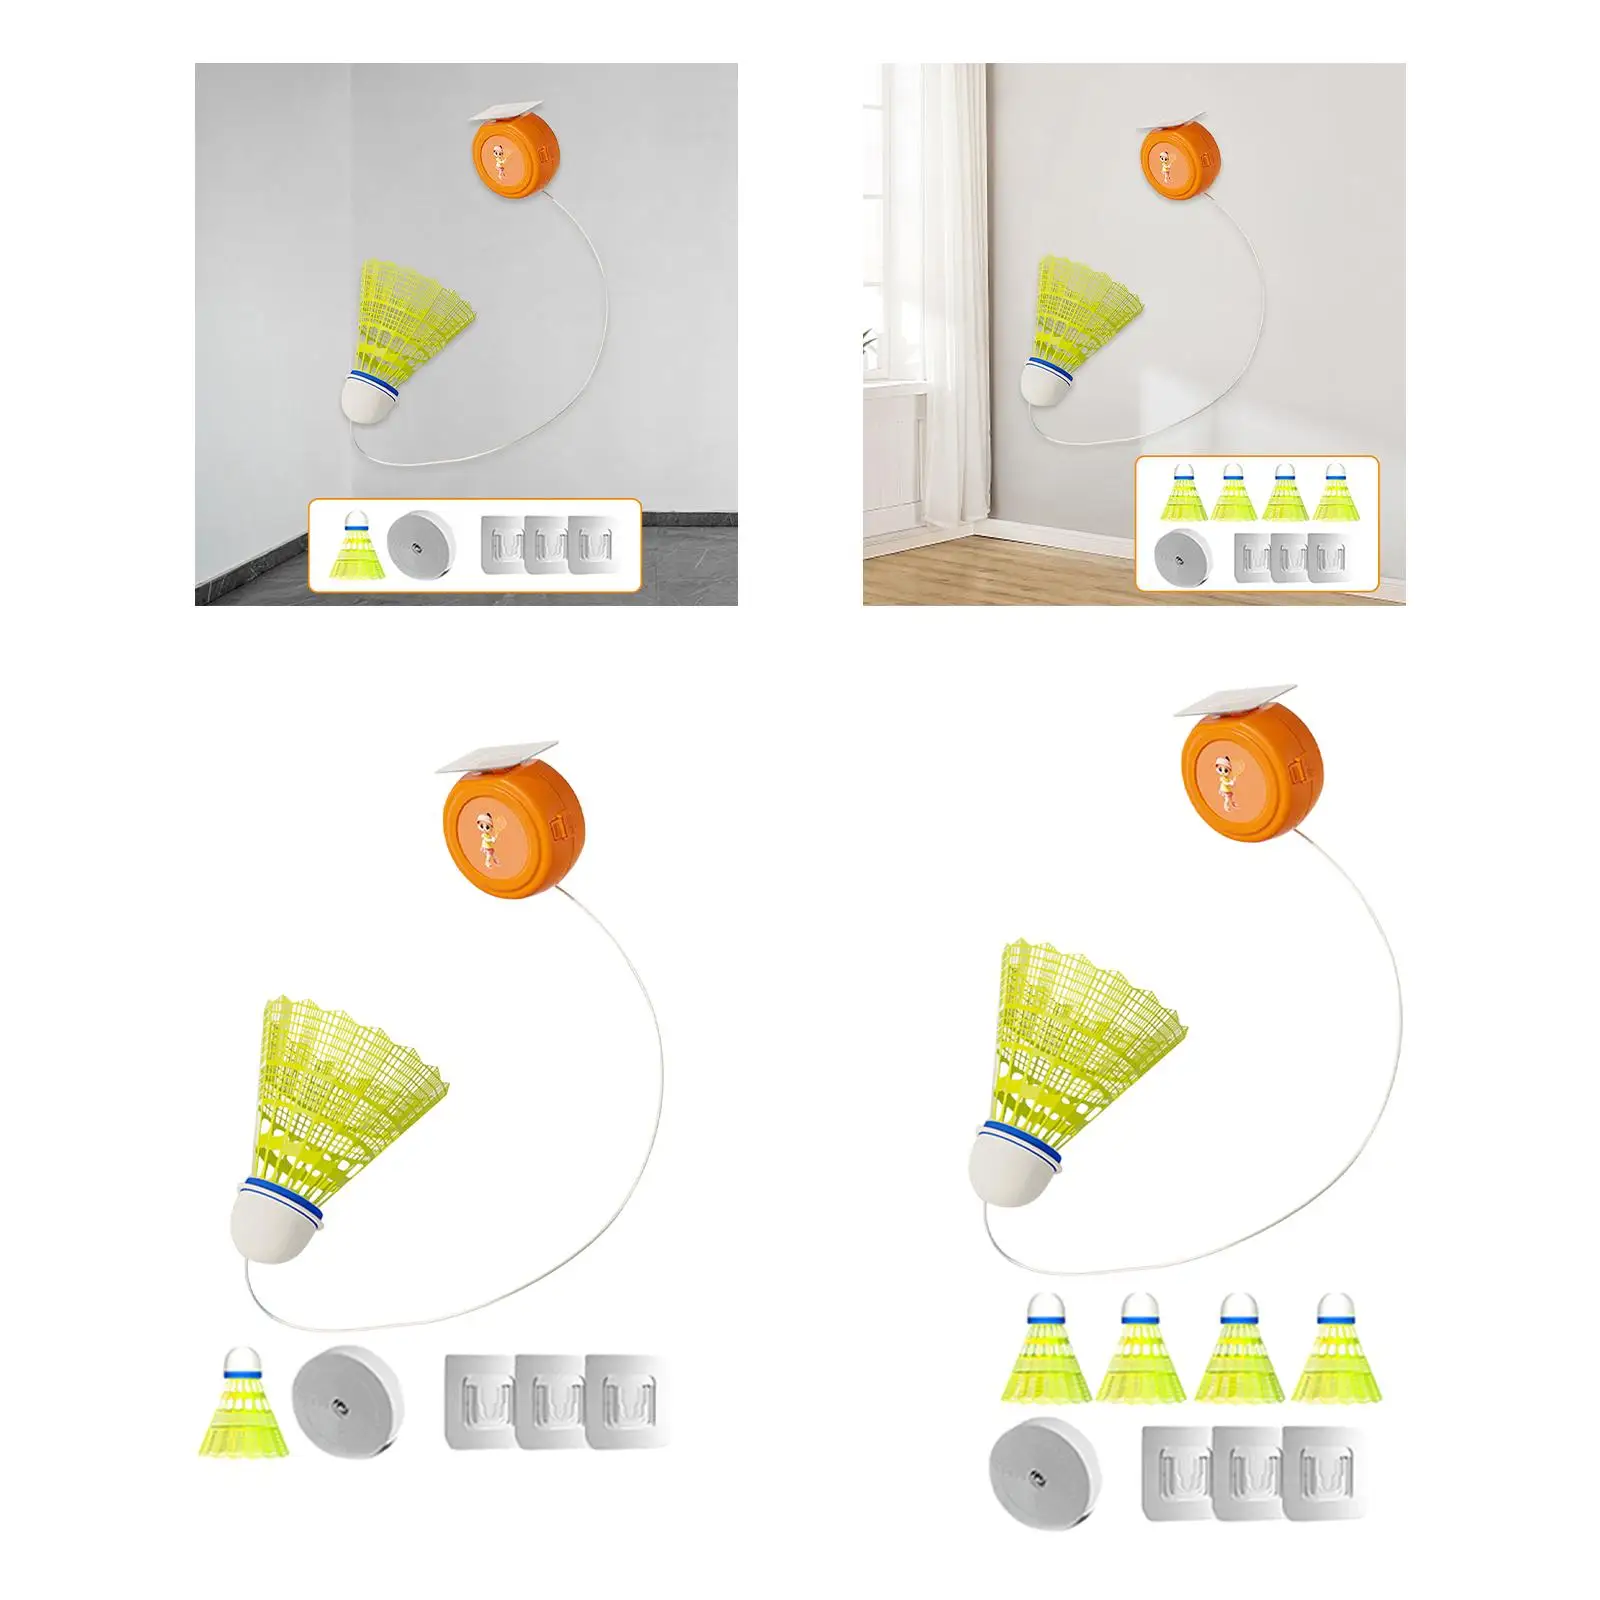 Badminton Solo Trainer, Badminton Training Device with Shuttlecock, Adjustable